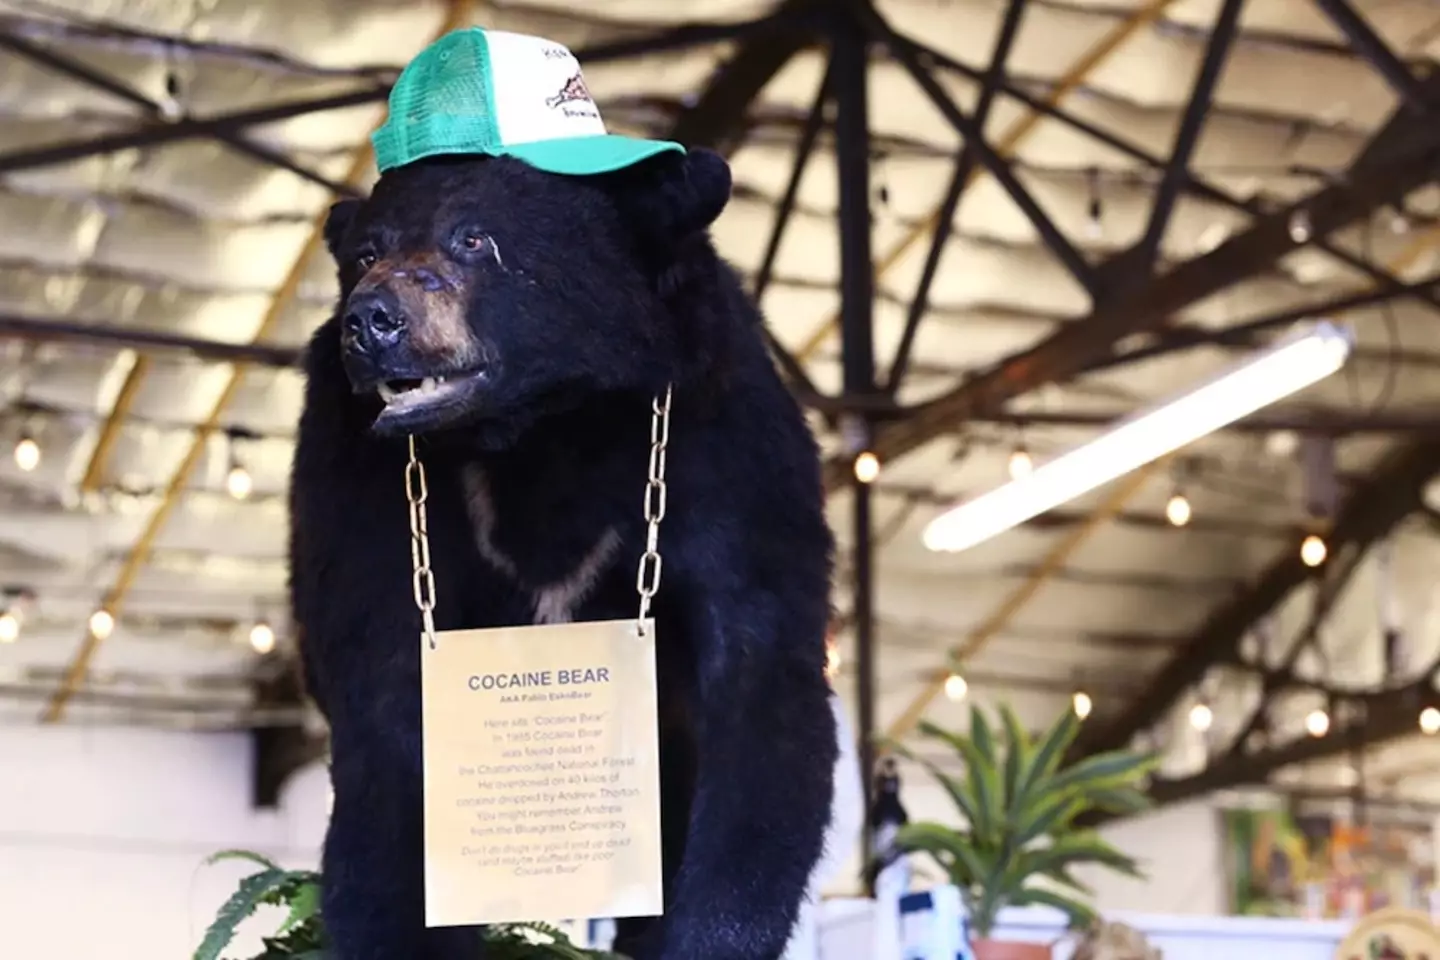 The Cocaine Bear really is an unbelievable story.